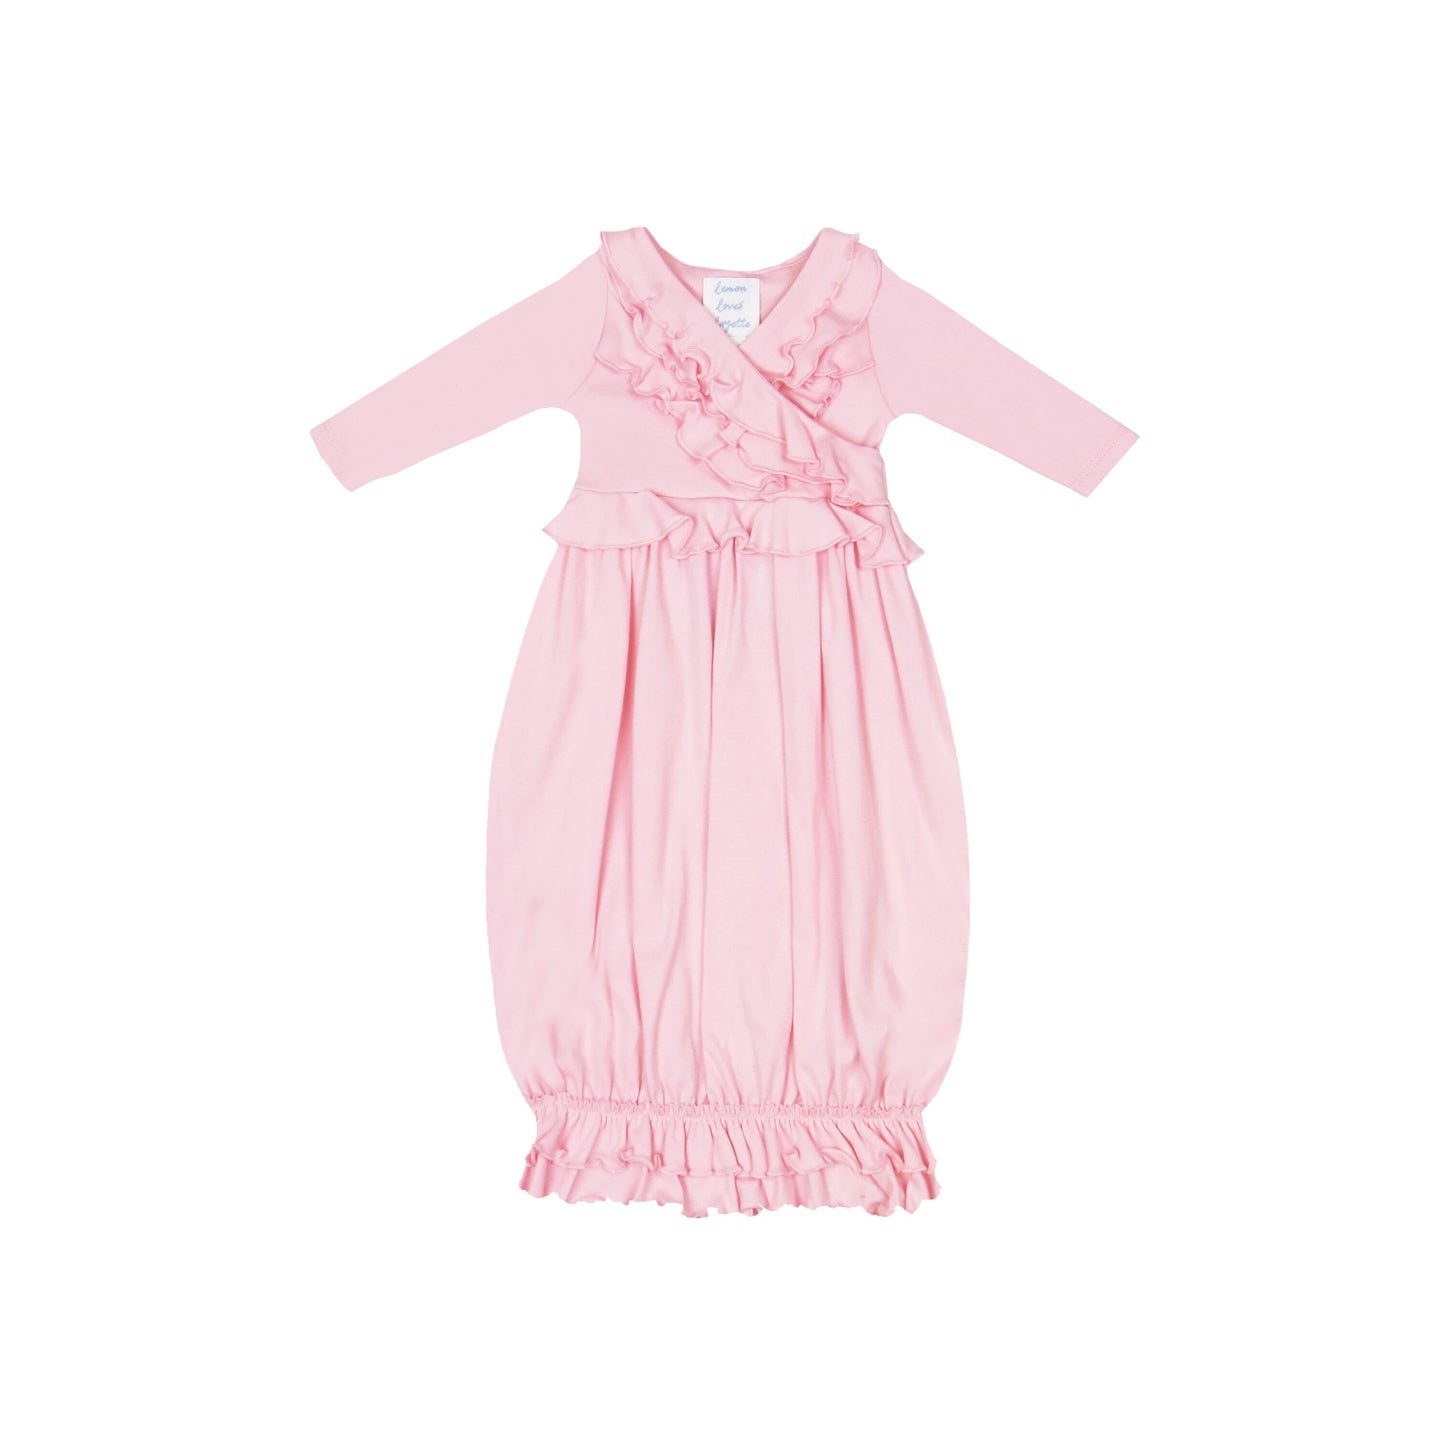 Jenna Gown in Rose Shadow  - Doodlebug's Children's Boutique